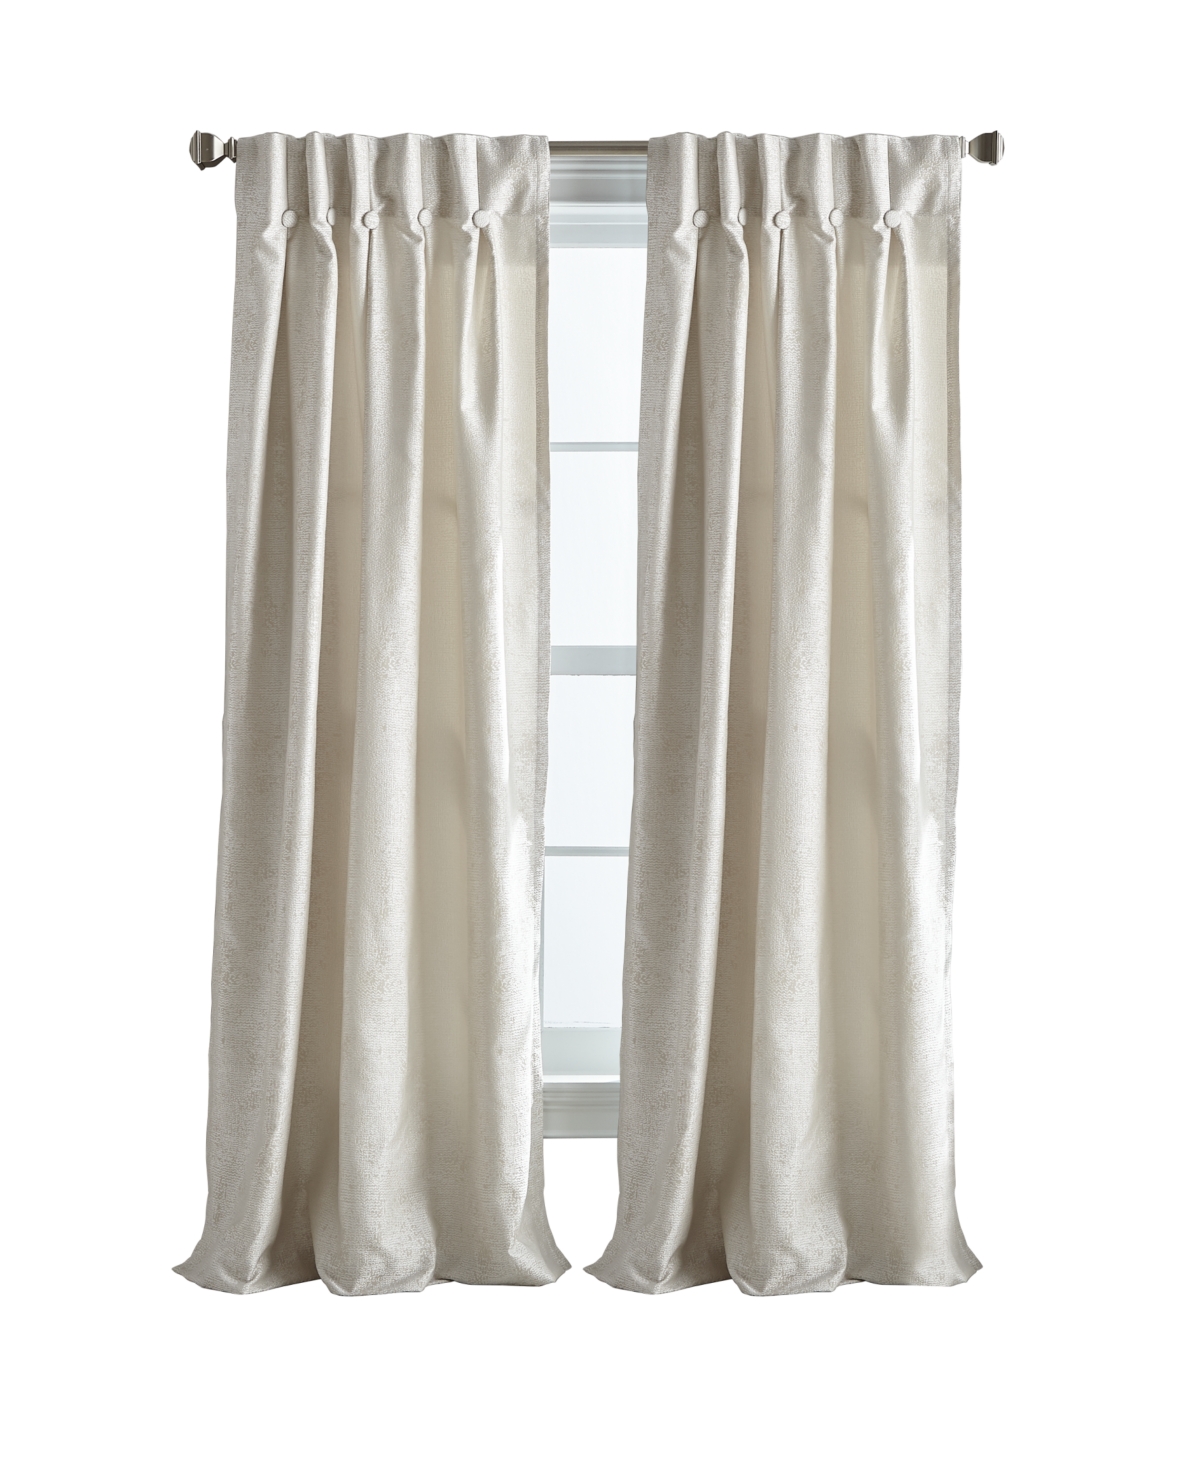 Dkny Plaza Light Filtering Inverted Pleat With Button Lined 2 Piece Window Panel, 84" X 32" In Champagne